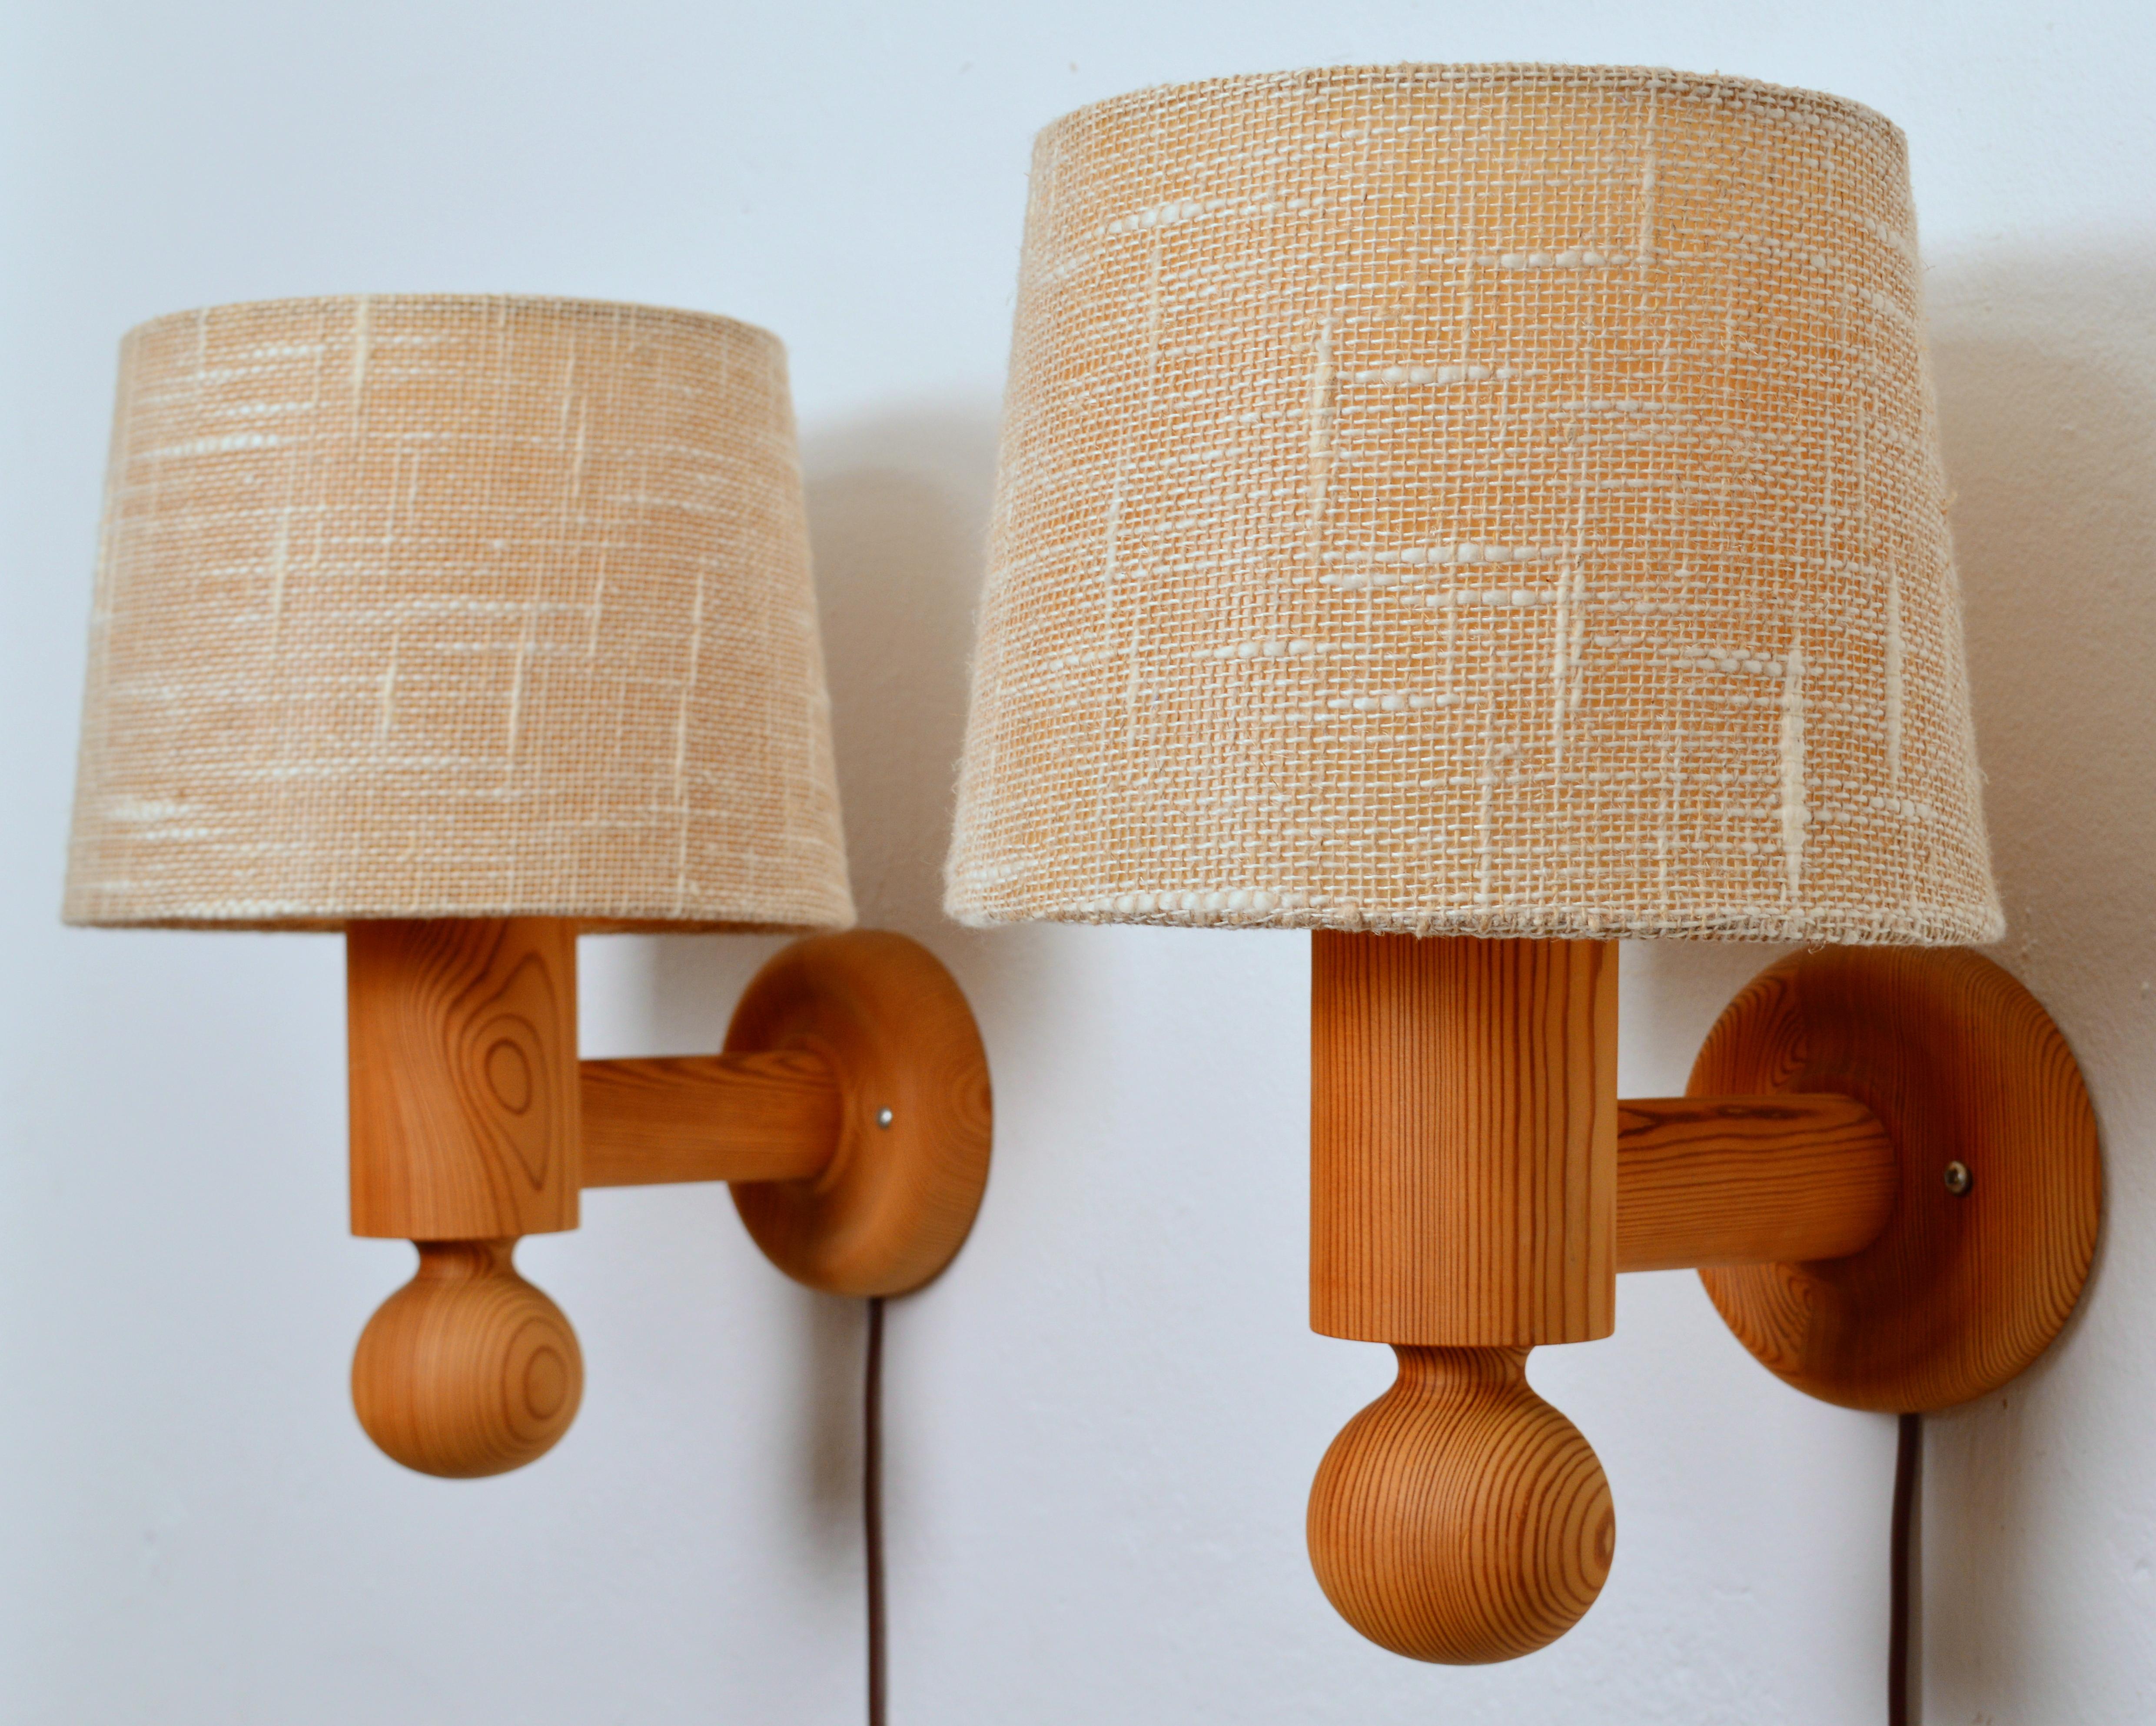 A pair of large wall lights designed by Uno Kristiansson circa 1966 and made by Luxus. The main body of the design is turned pine wood. White acrylic diffusers sit atop the sconces and fabric shades cloche the diffusers. Although the form of the